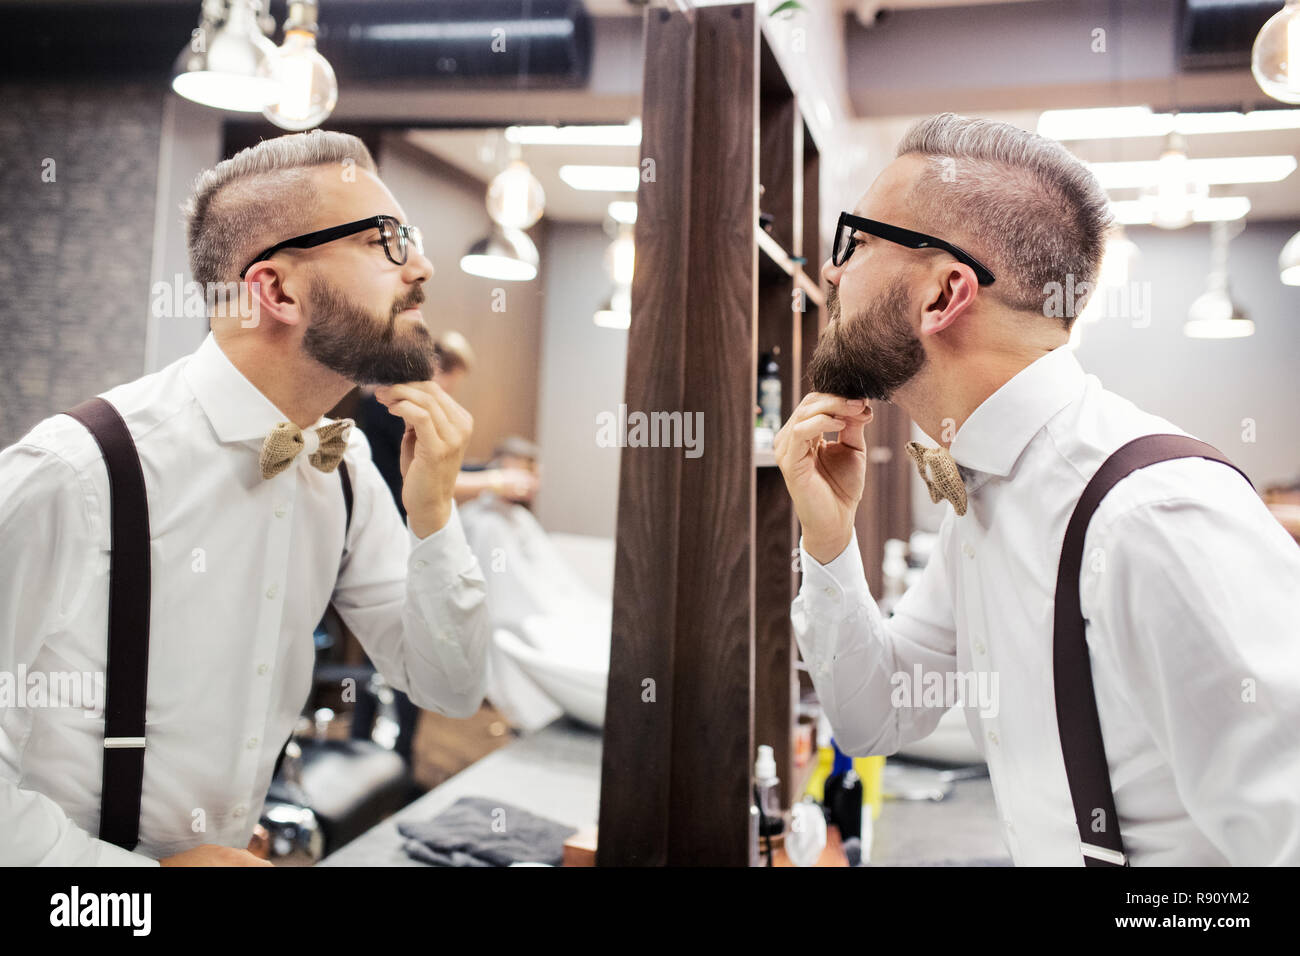 Handsome hipster man client with glasses looking in the mirror in barber shop. Stock Photo